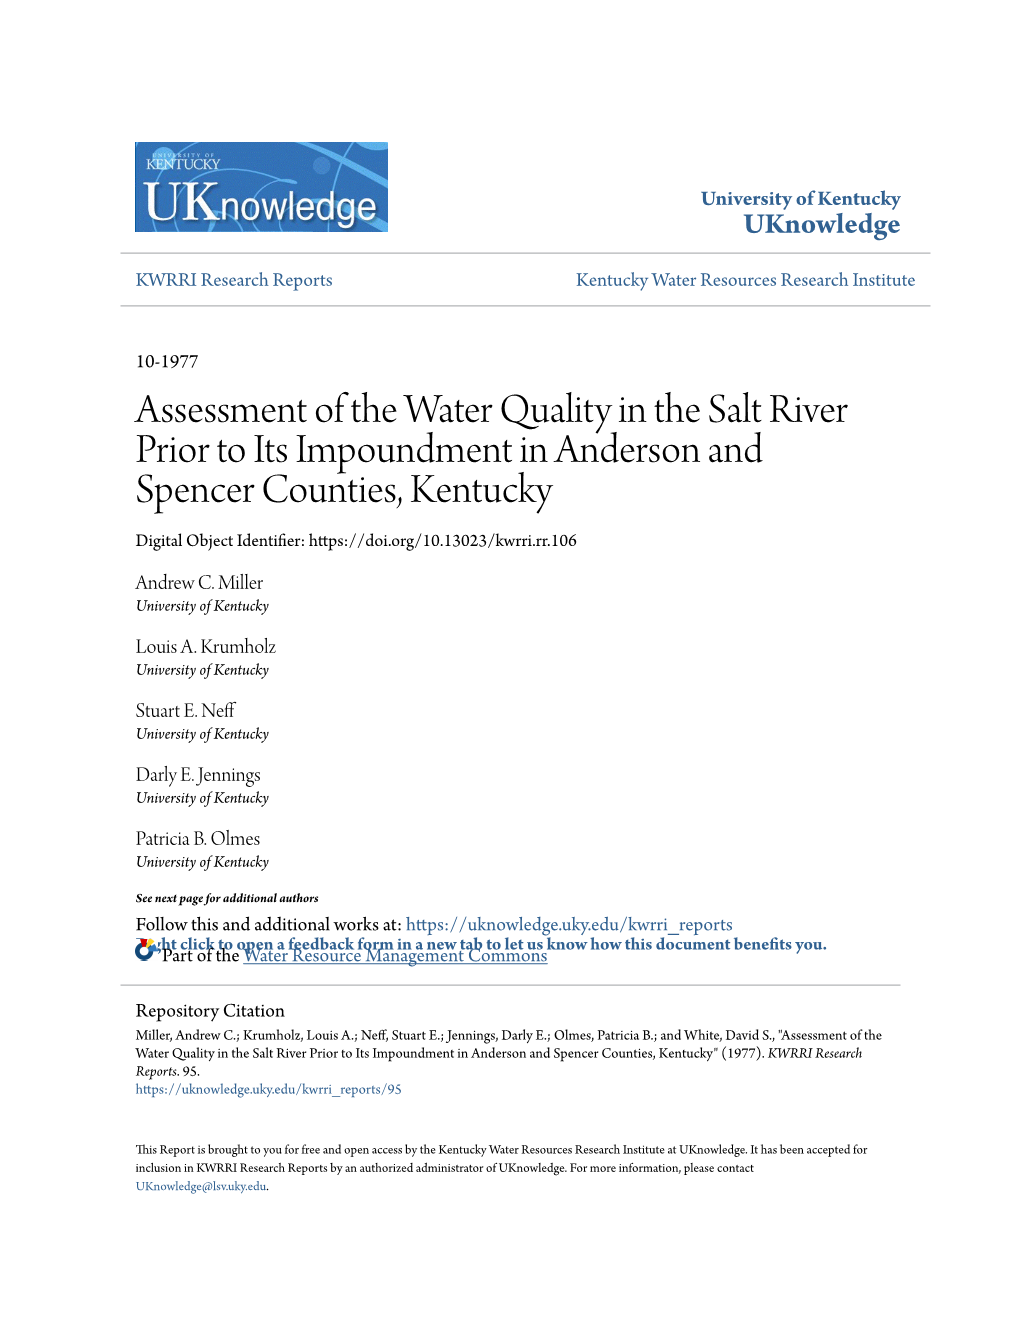 Assessment of the Water Quality In